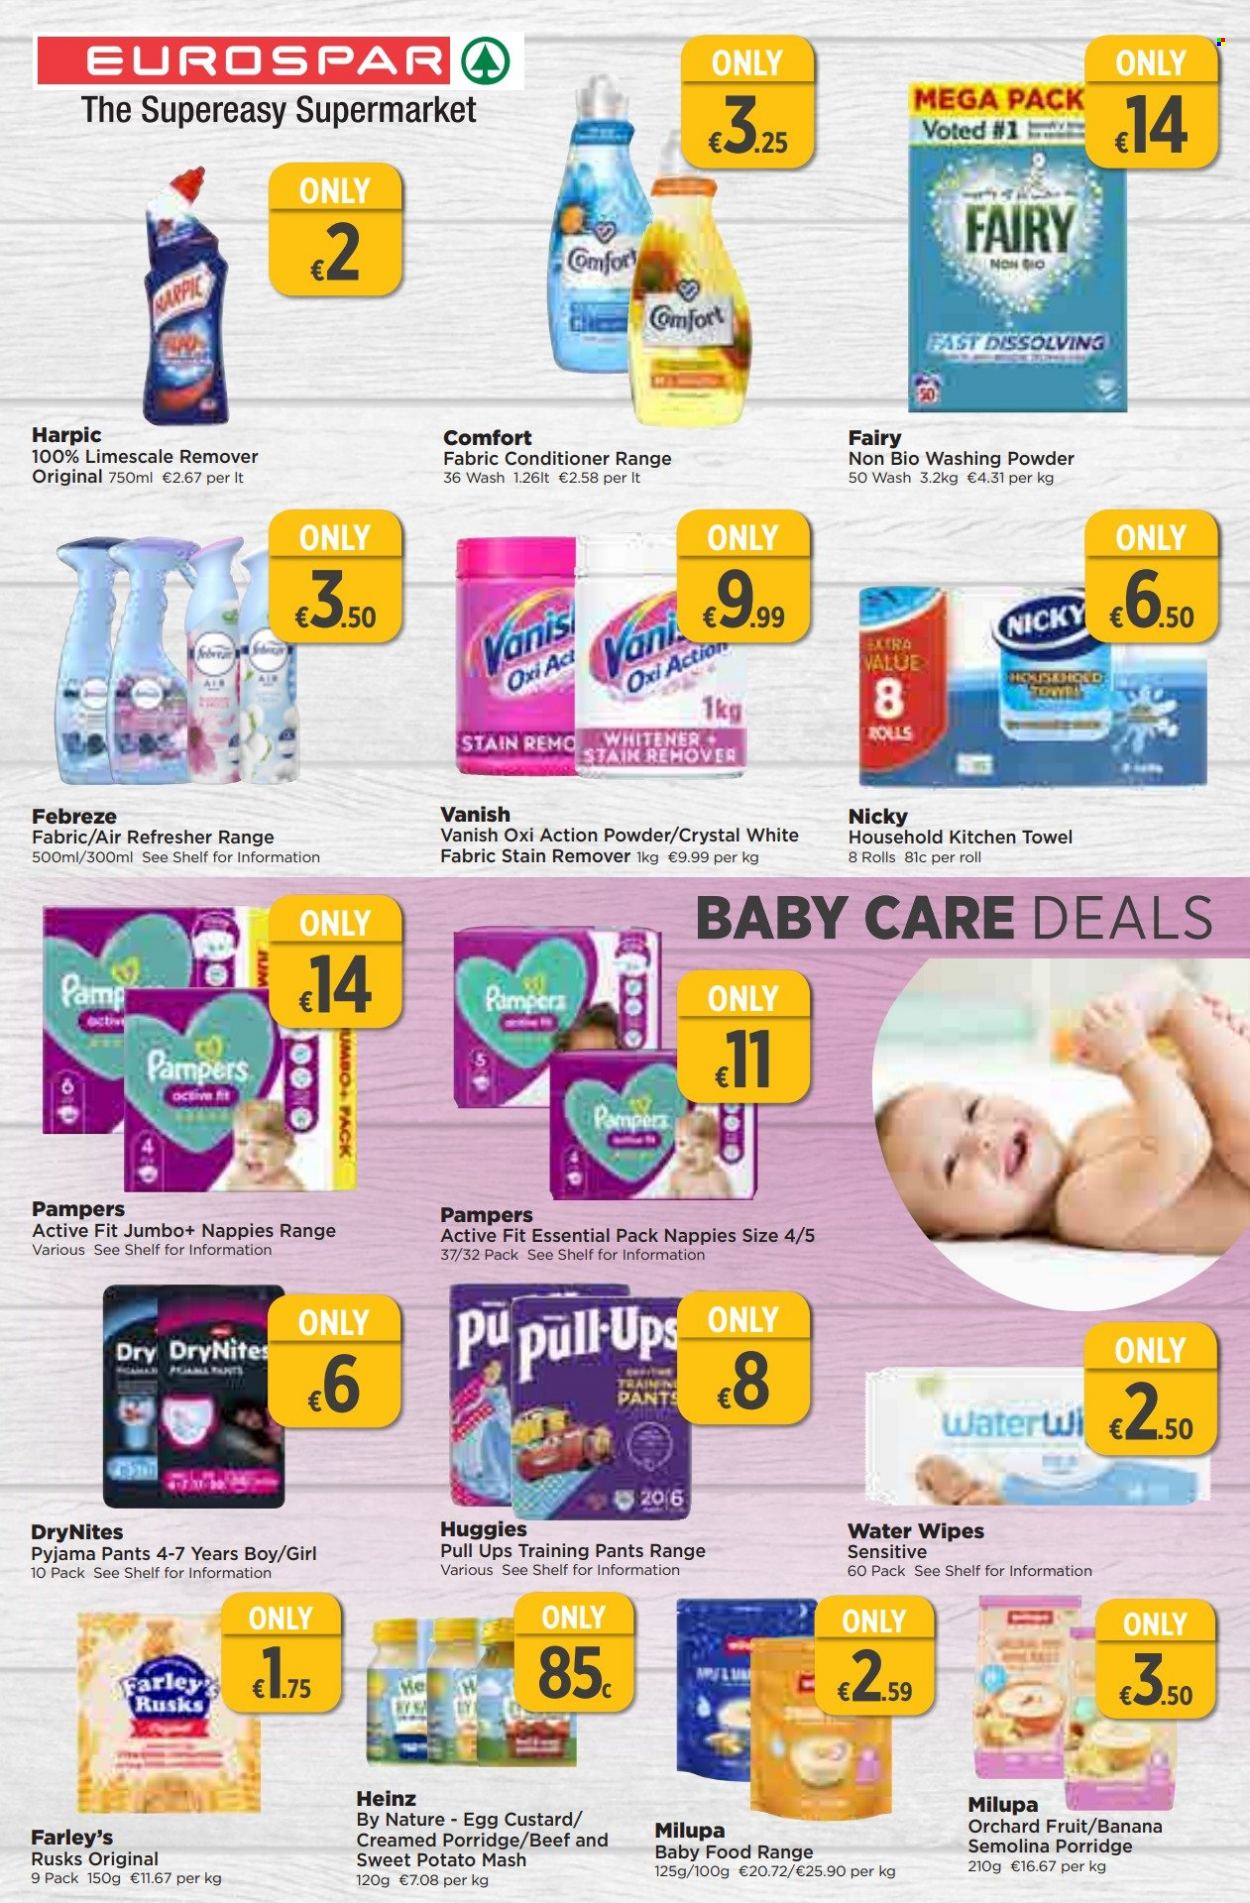 thumbnail - EUROSPAR offer  - 02.03.2023 - 22.03.2023 - Sales products - rusks, custard, eggs, semolina, Heinz, porridge, water, wipes, Huggies, Pampers, pants, nappies, DryNites, baby pants, kitchen towels, Febreze, stain remover, Fairy, Harpic, Vanish, Fab, refresher. Page 12.